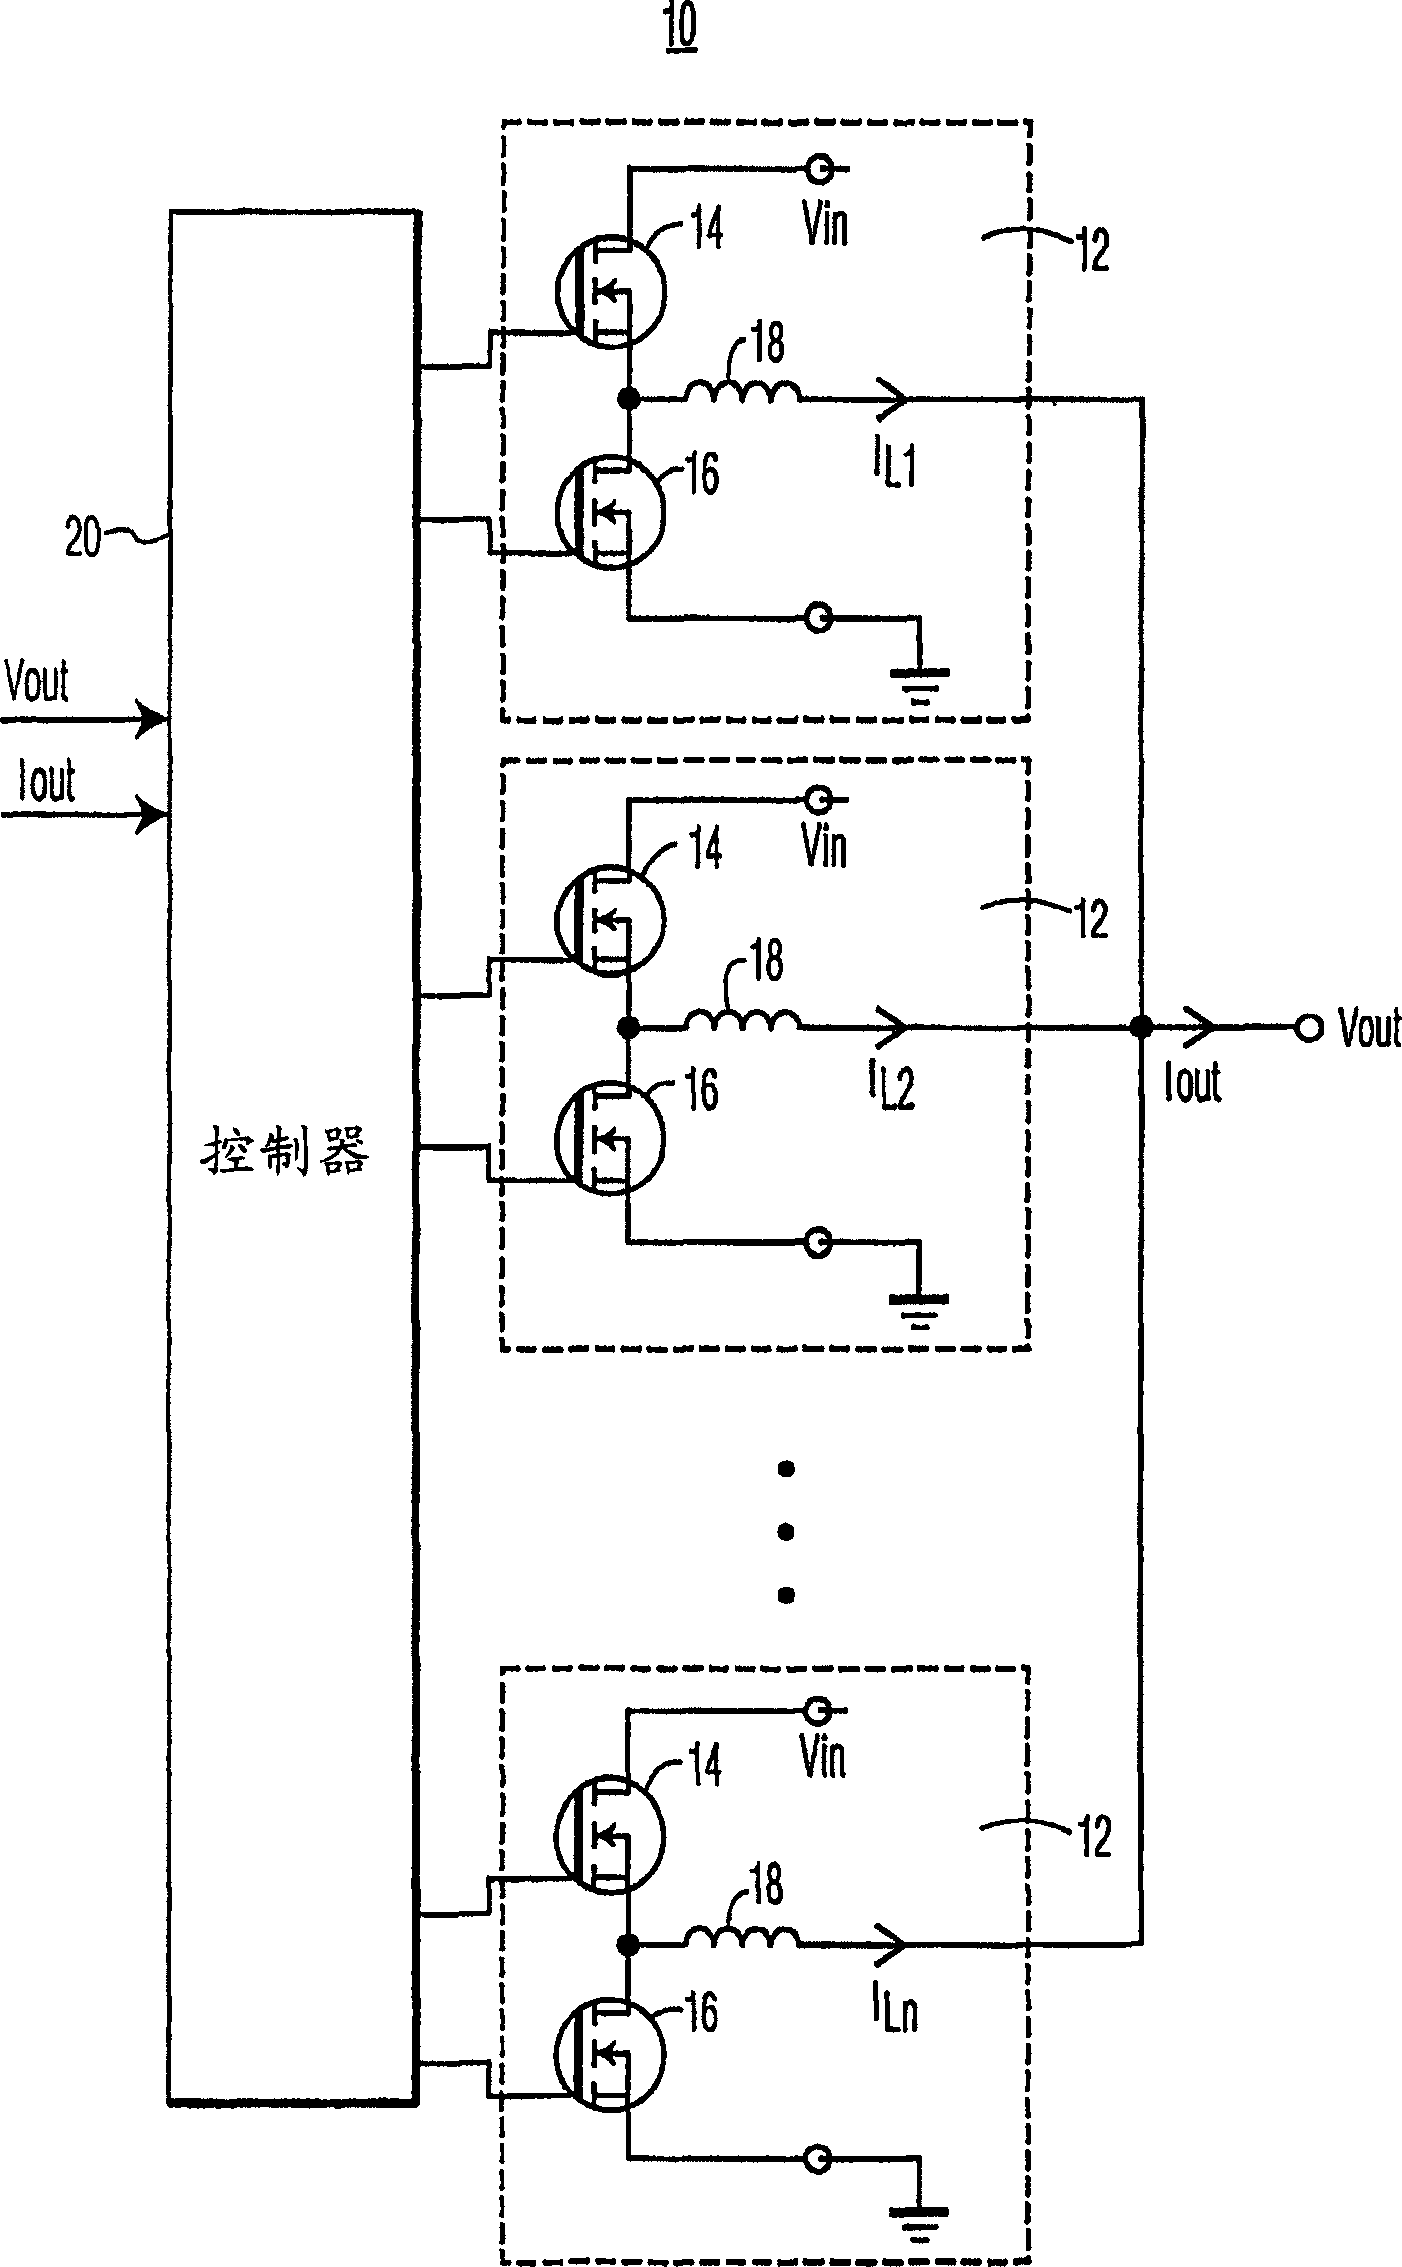 N-phase integrated buck converter